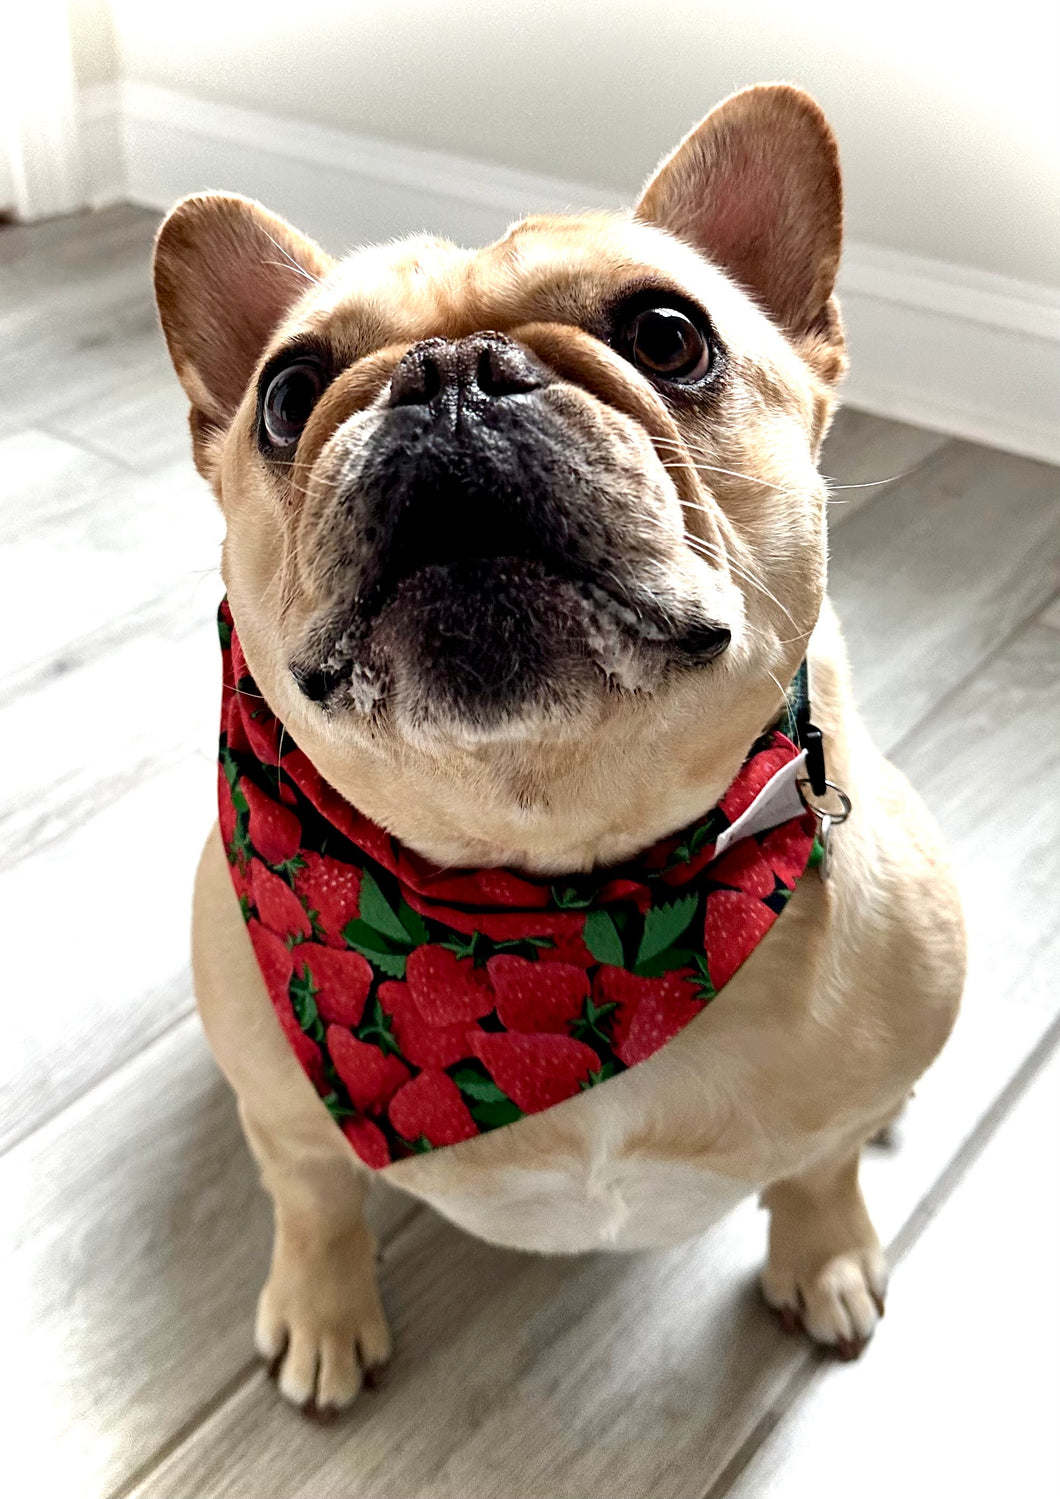 Strawberry Dog Bandana Cute Summer Fruit Pet Scarf Spring Outfit For Dog Photoshoot Idea Unique Gift for Dog Owner Custom Name Puppy Apparel